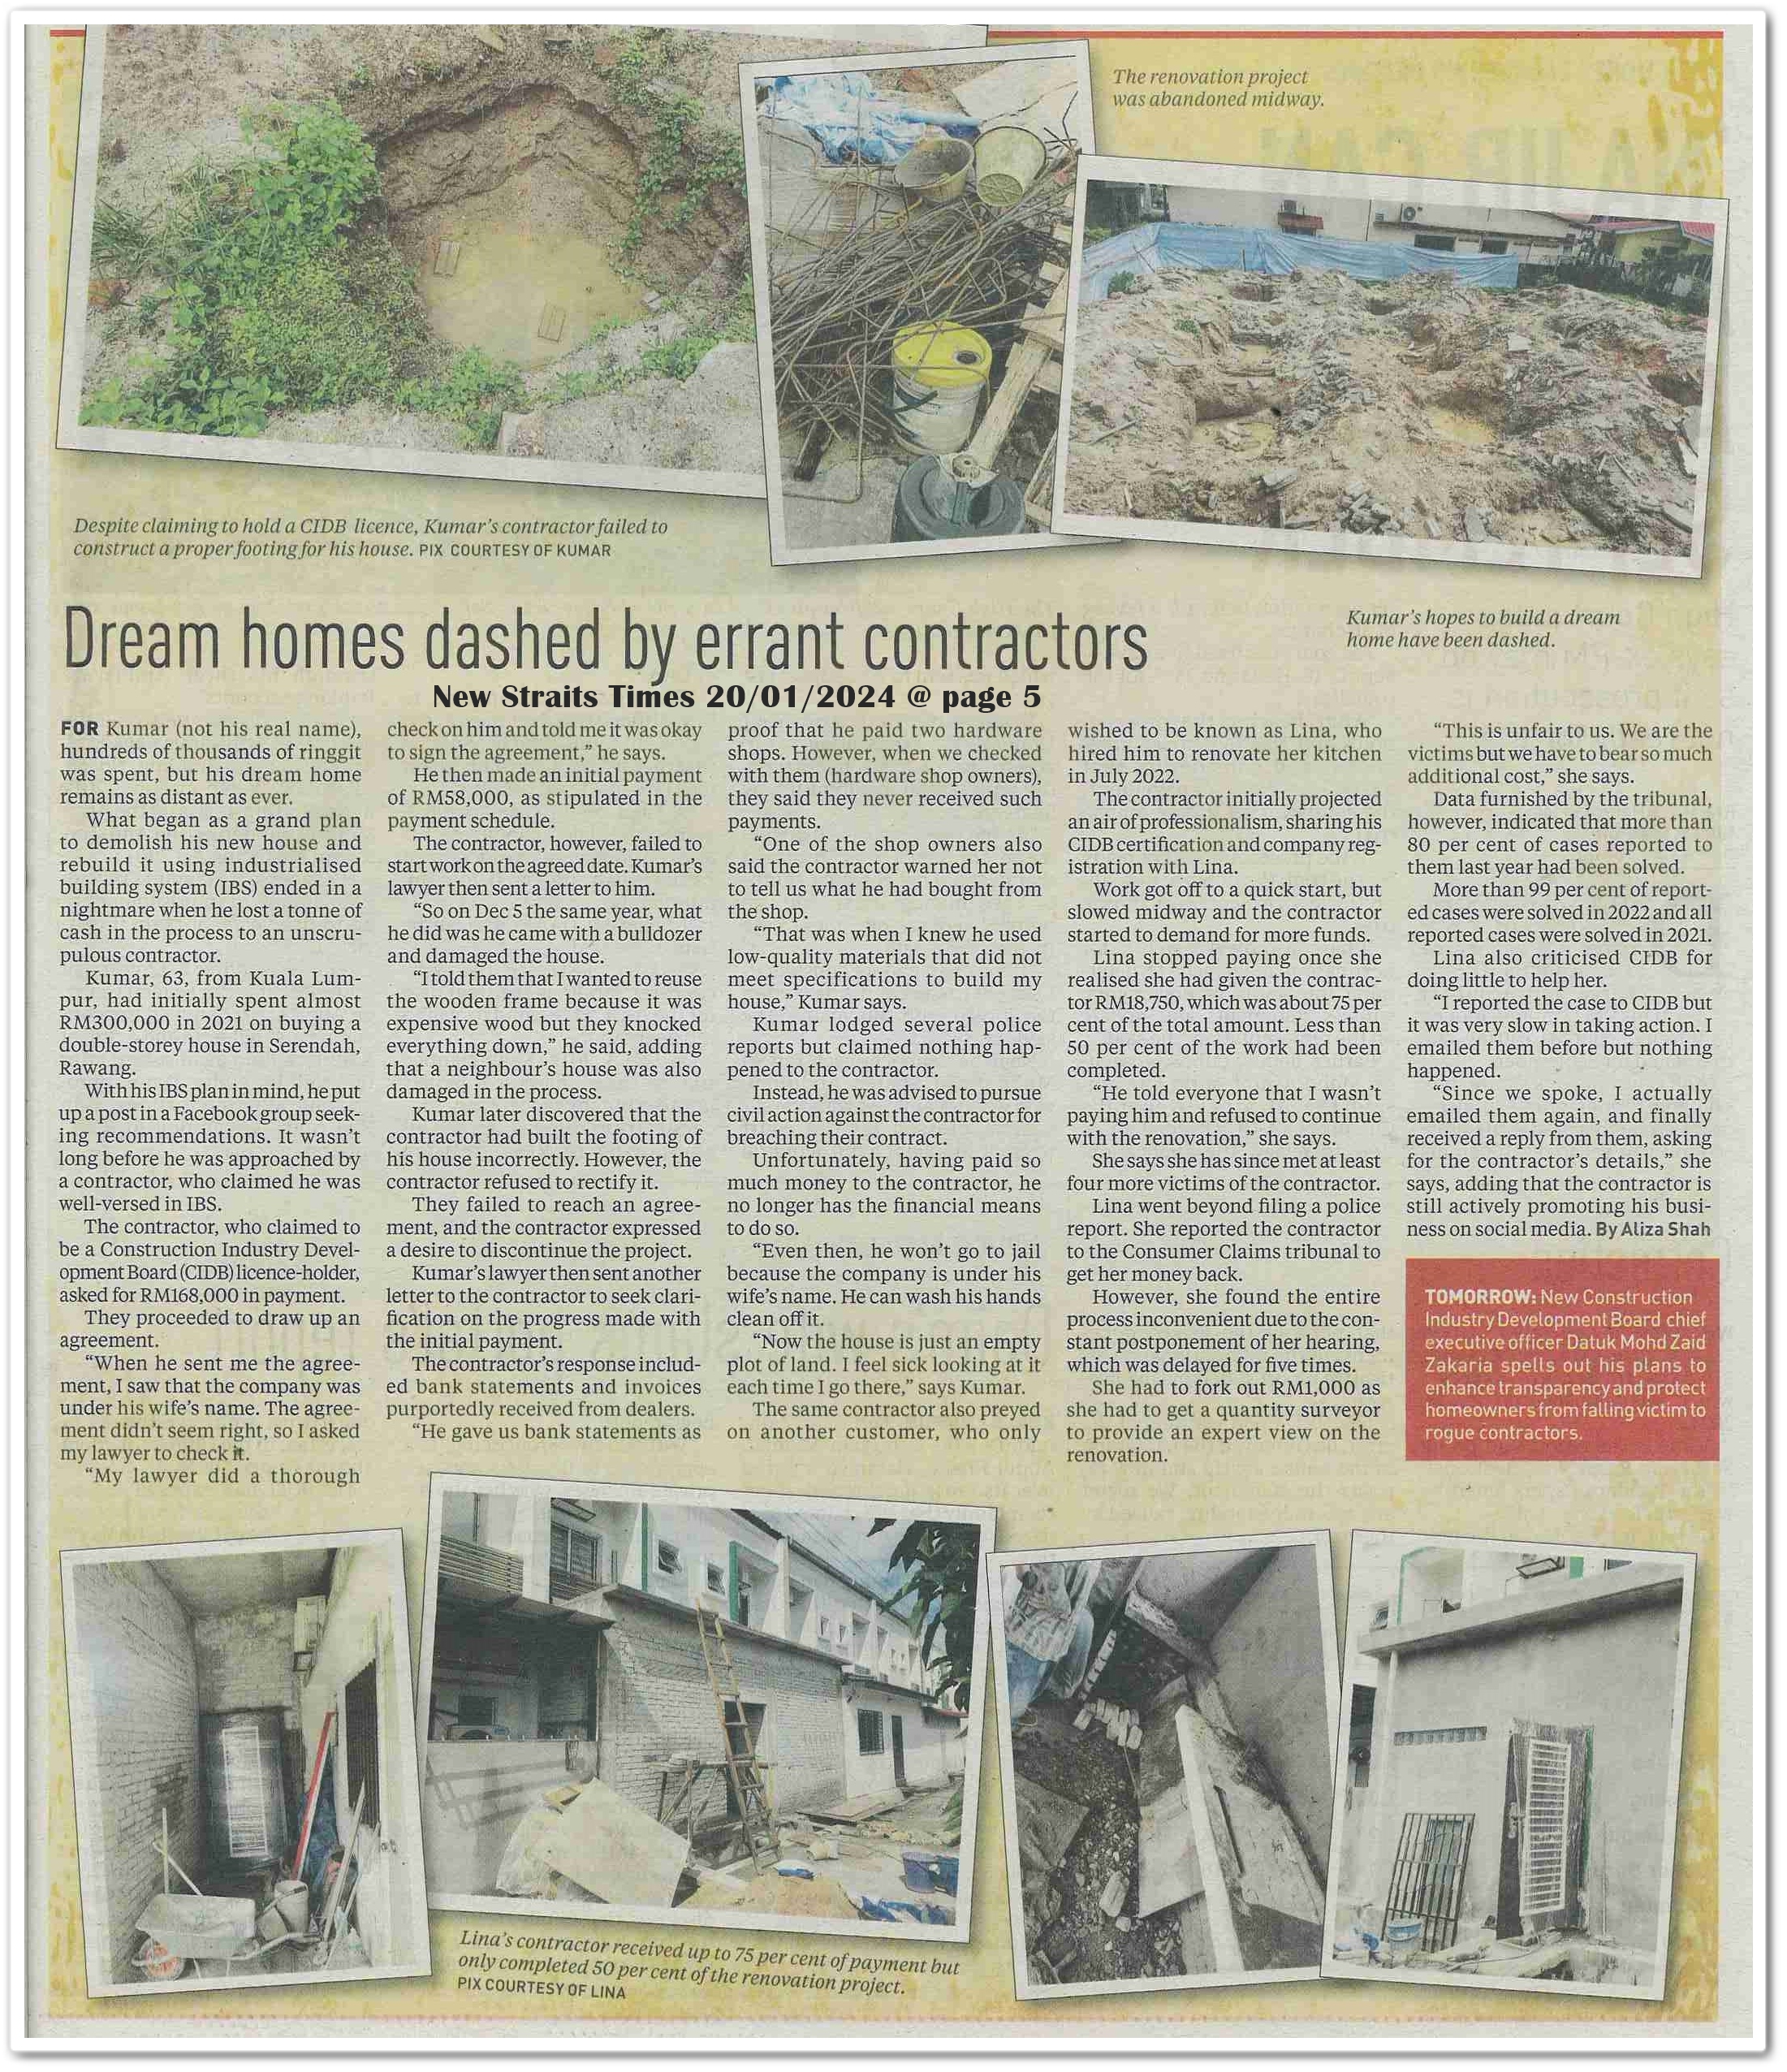 Home dreams crushed ; Some contractors preying on gullible customers ; Vicious cycle that allows problematic contractors to flourish ; Dream homes dashed by errant contractors | Keratan akhbar New Straits Times 20 January 2024